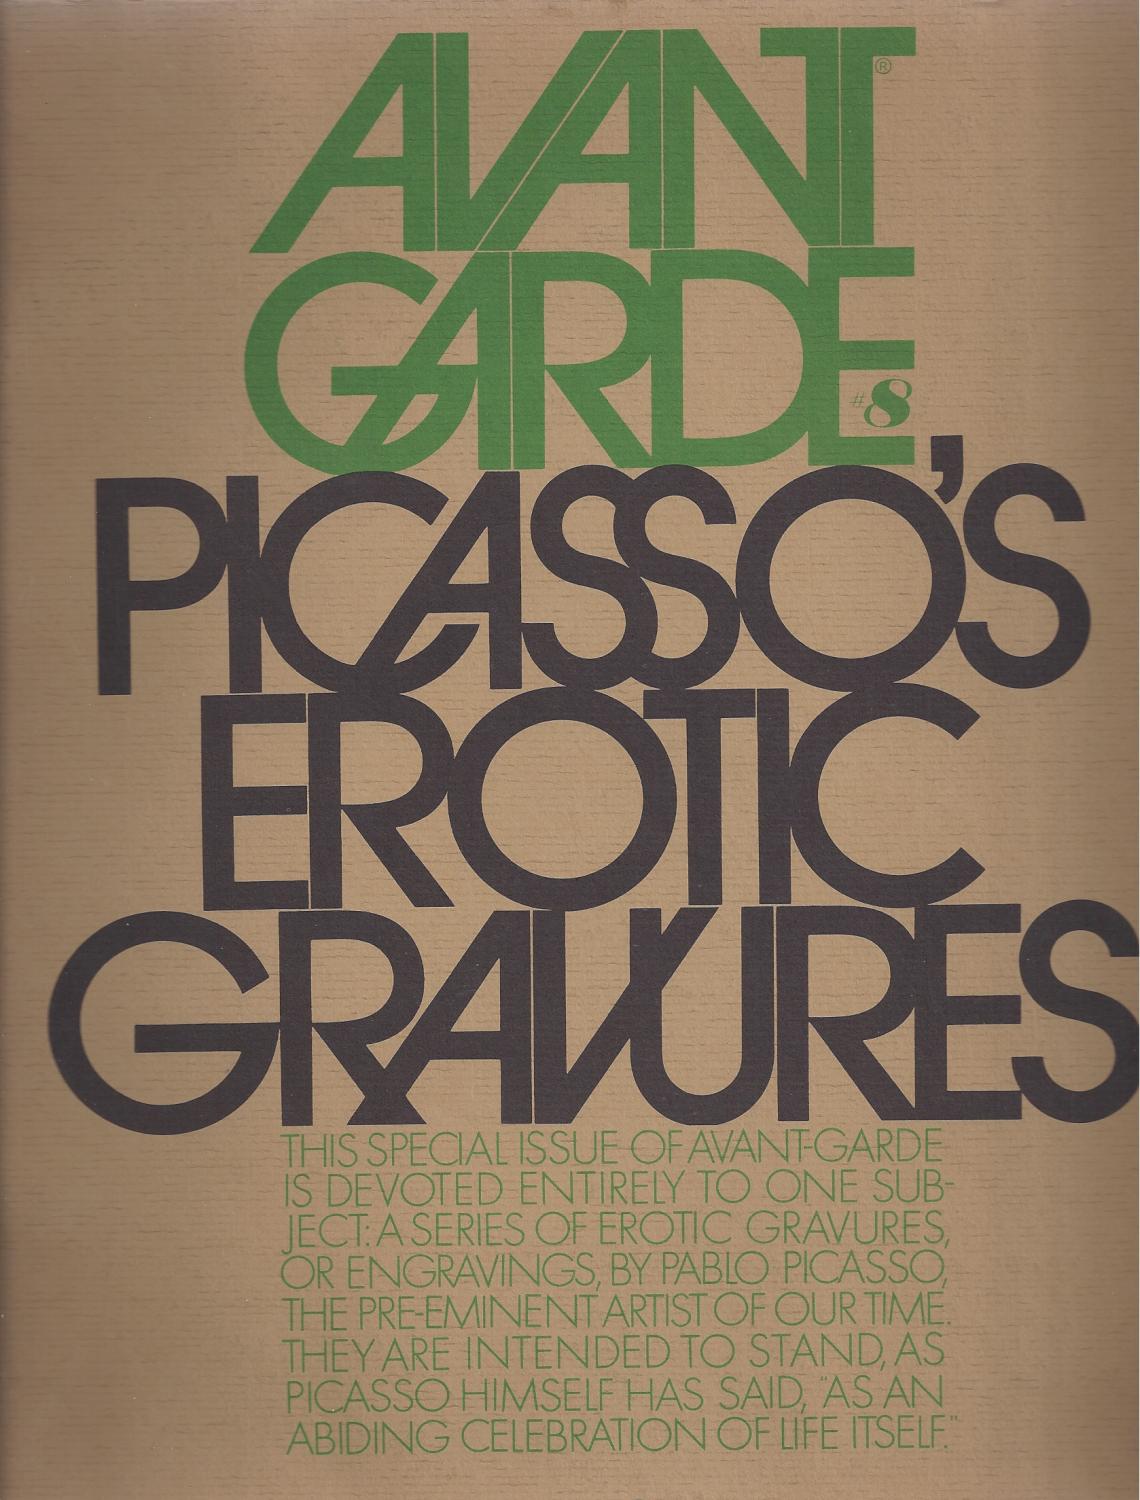 AVANT-GARDE N° 8 - PICASSO'S EROTIC GRAVURES - This special issue of ...